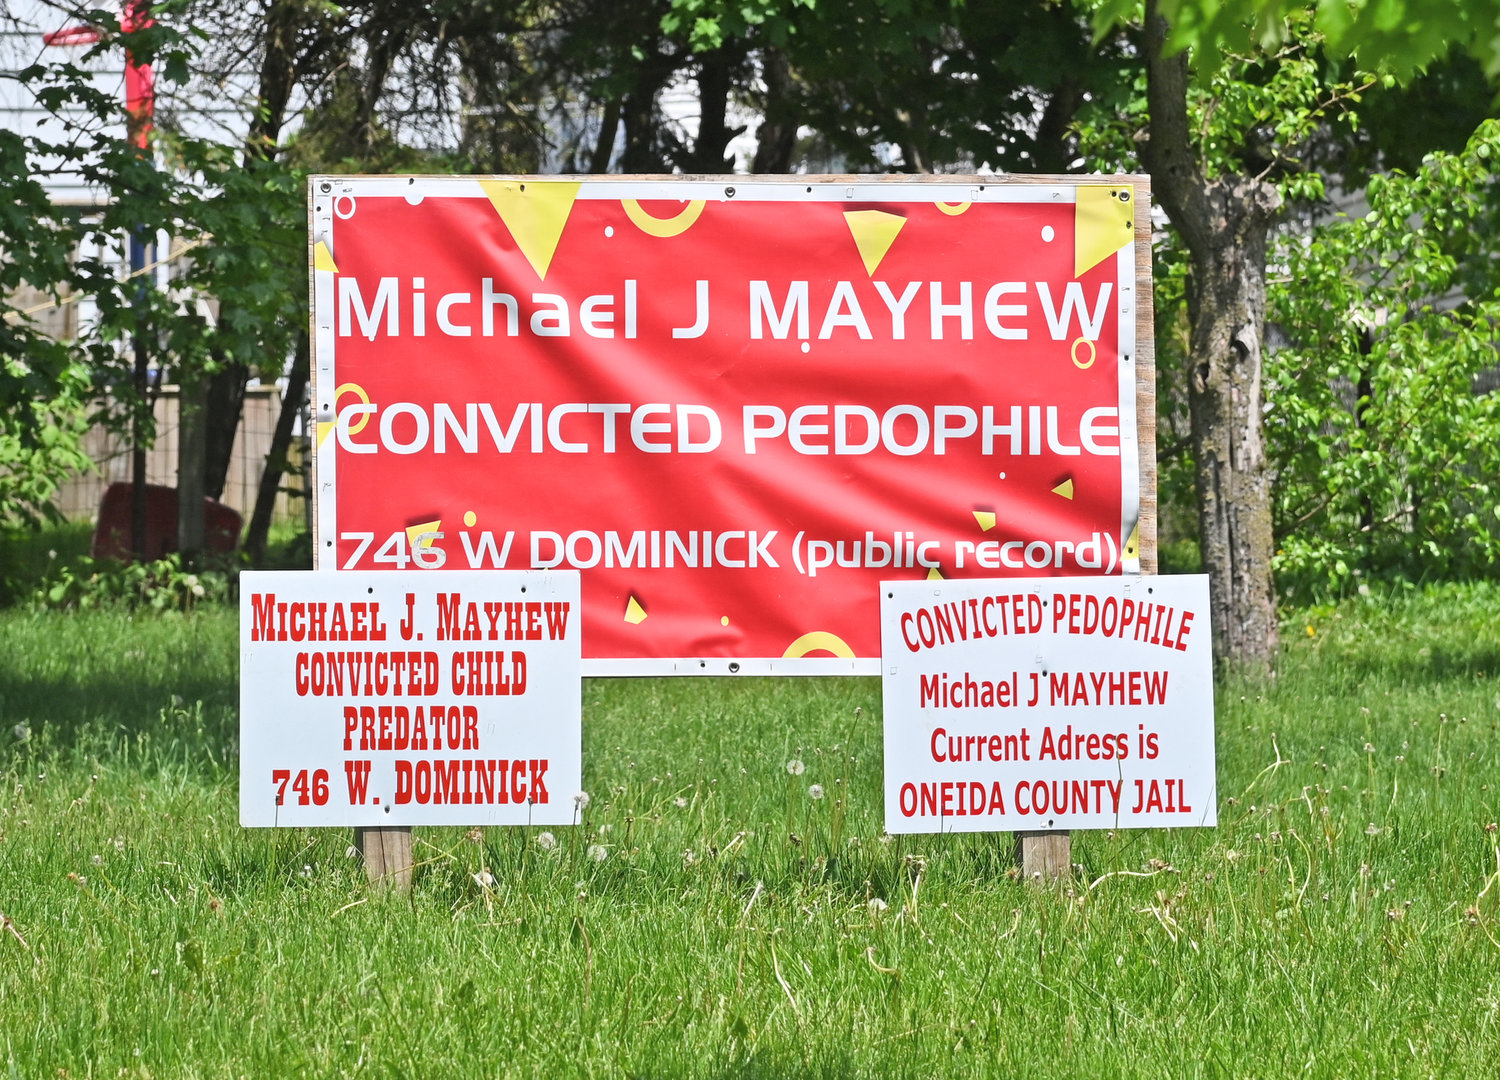 FREE SPEECH — The above sign, located in a yard in a west Rome residence, has garnered significant social media criticism recently. According to city officials, the sign is legal and protected as “free speech.”